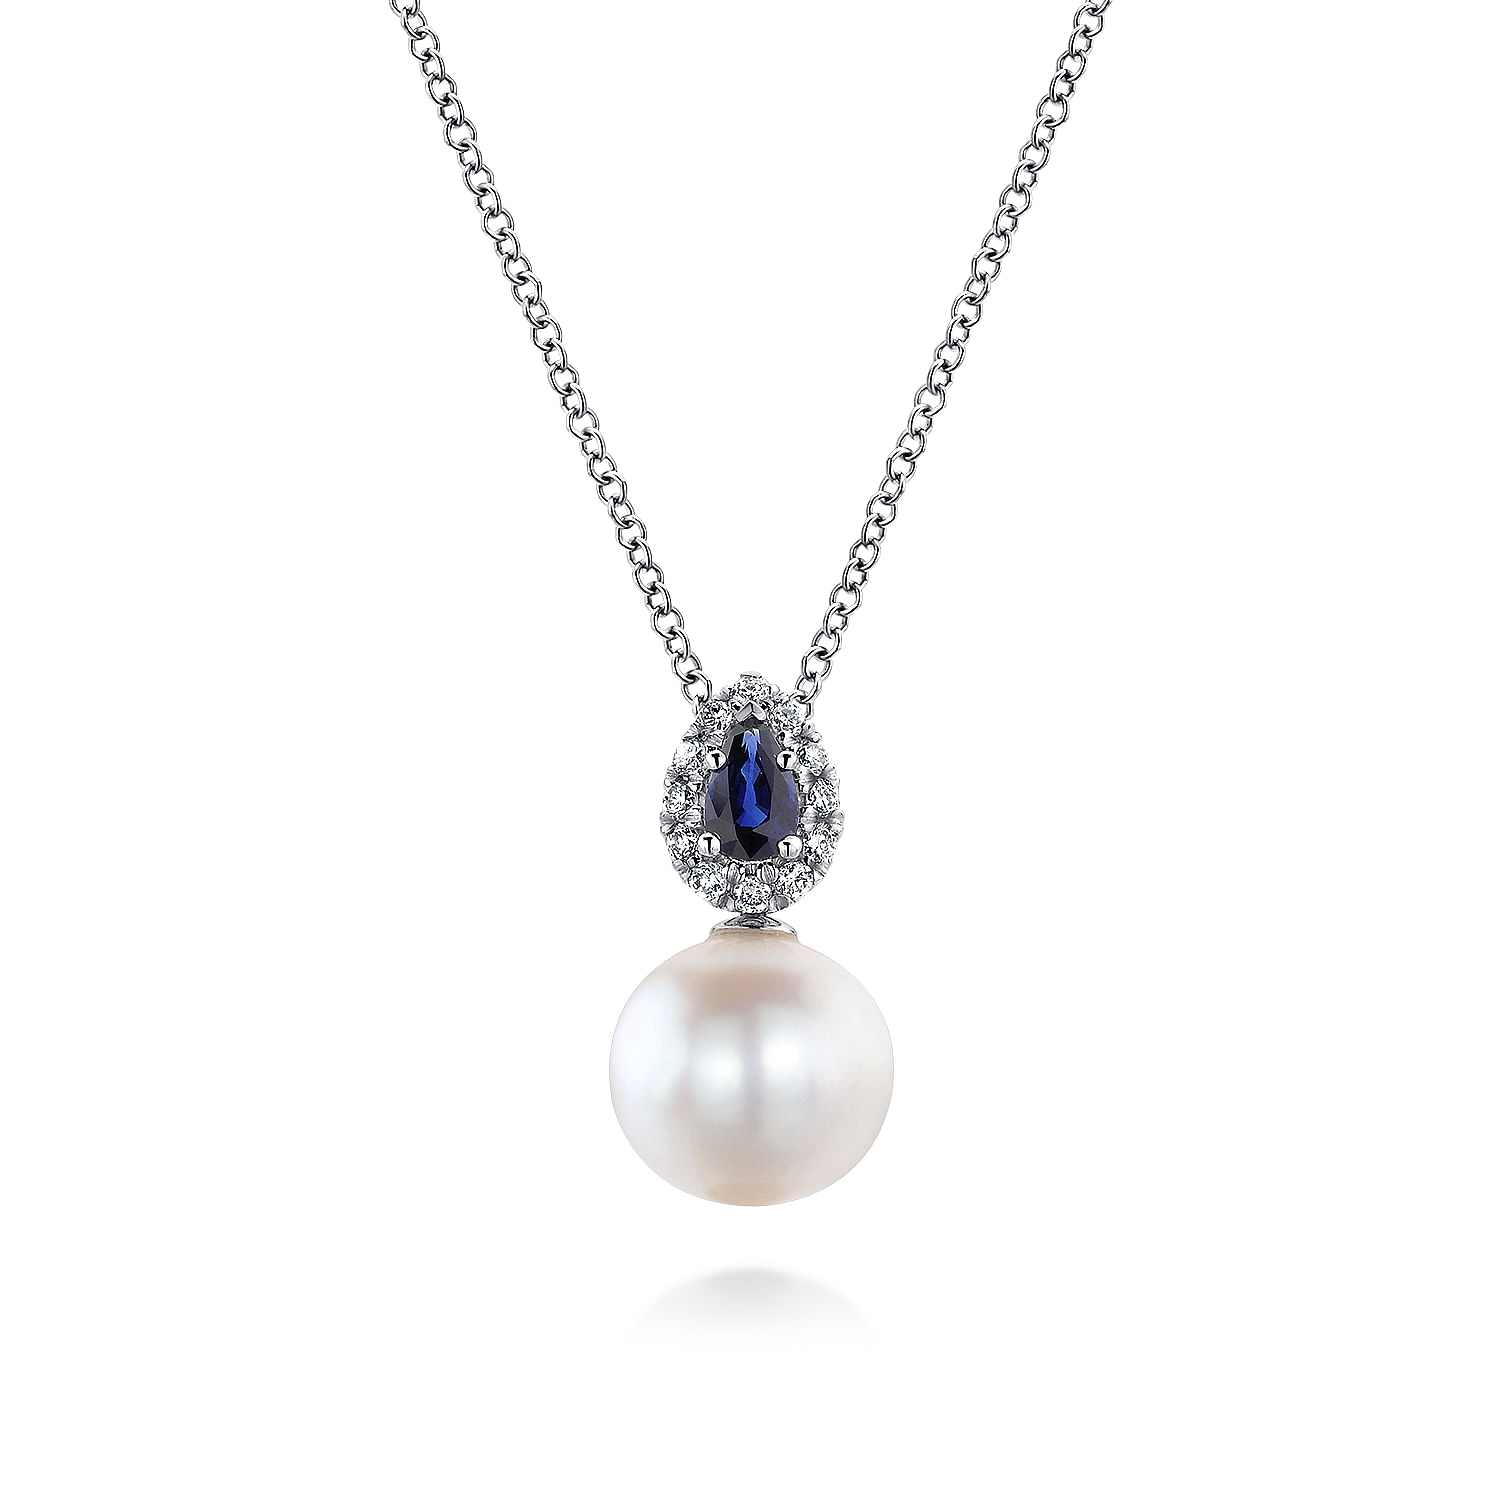 Gabriel - 14K White Gold Pear Shaped Sapphire and Diamond Halo Pendant Necklace with Pearl 